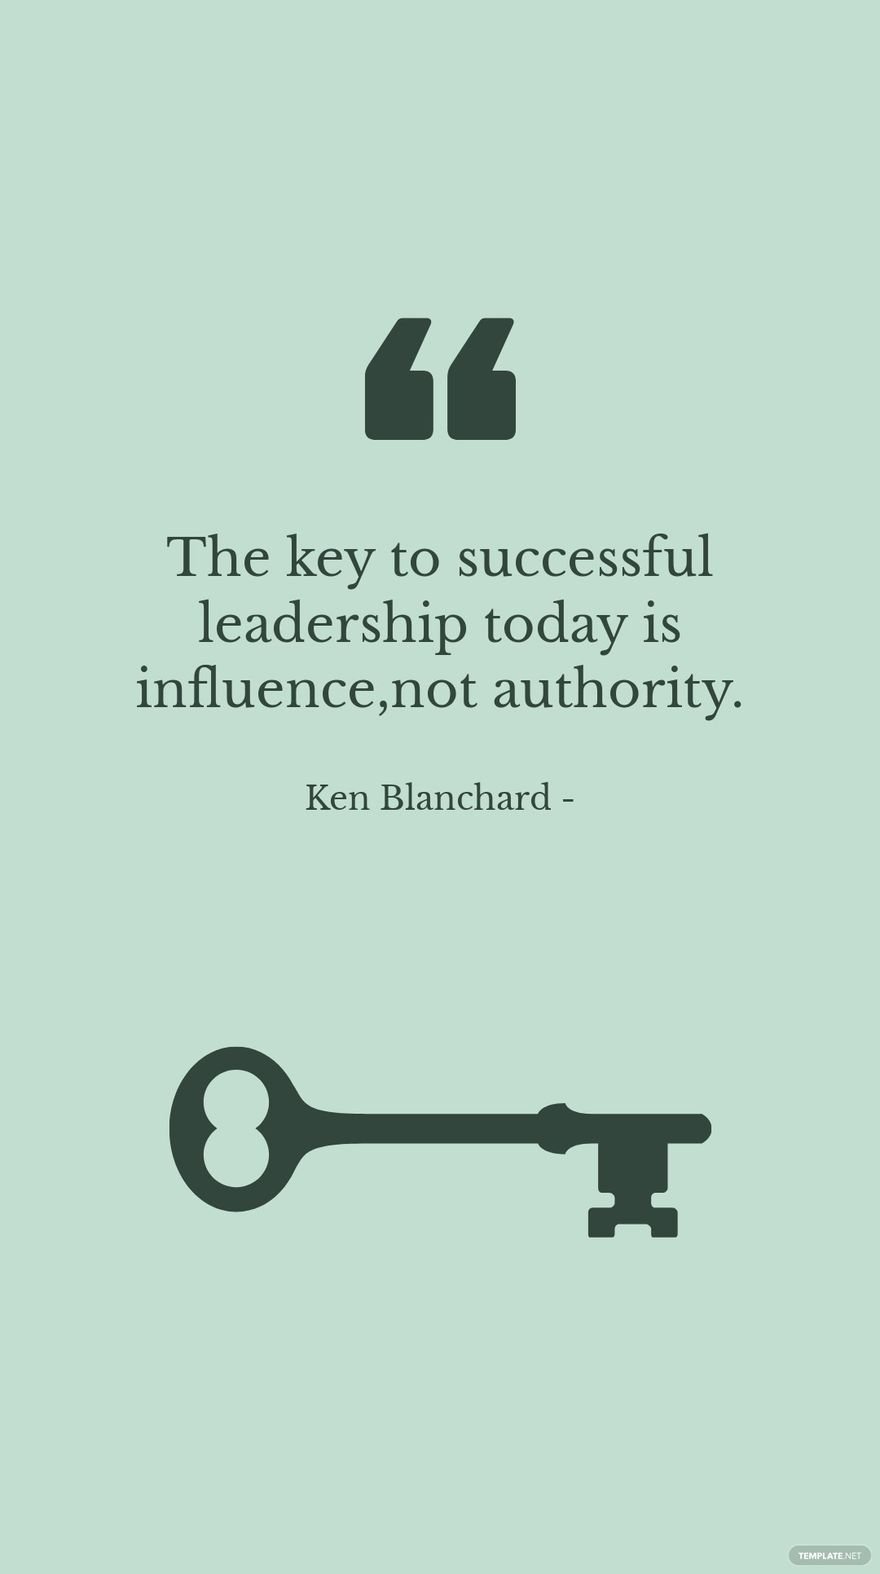 Free Ken Blanchard - The key to successful leadership today is influence, not authority. in JPG